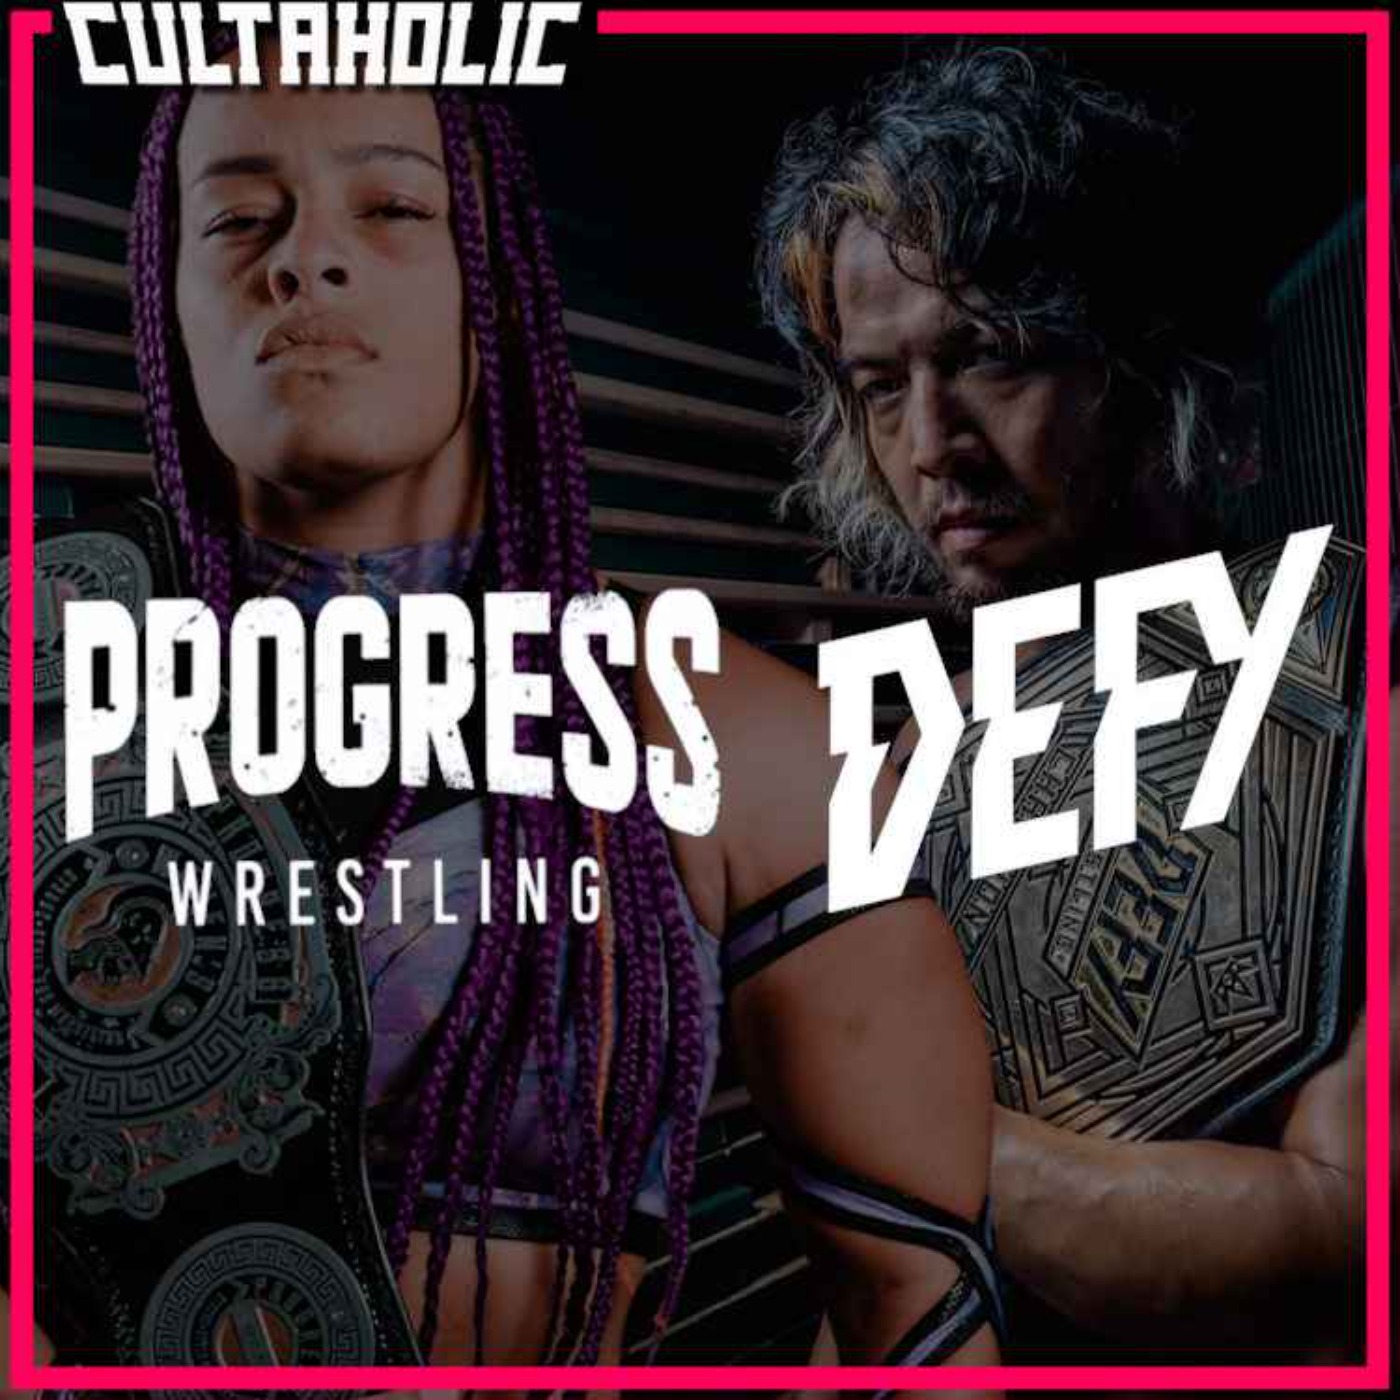 Exclusive - Behind The Scenes on the PROGRESS X DEFY Wrestling Merger